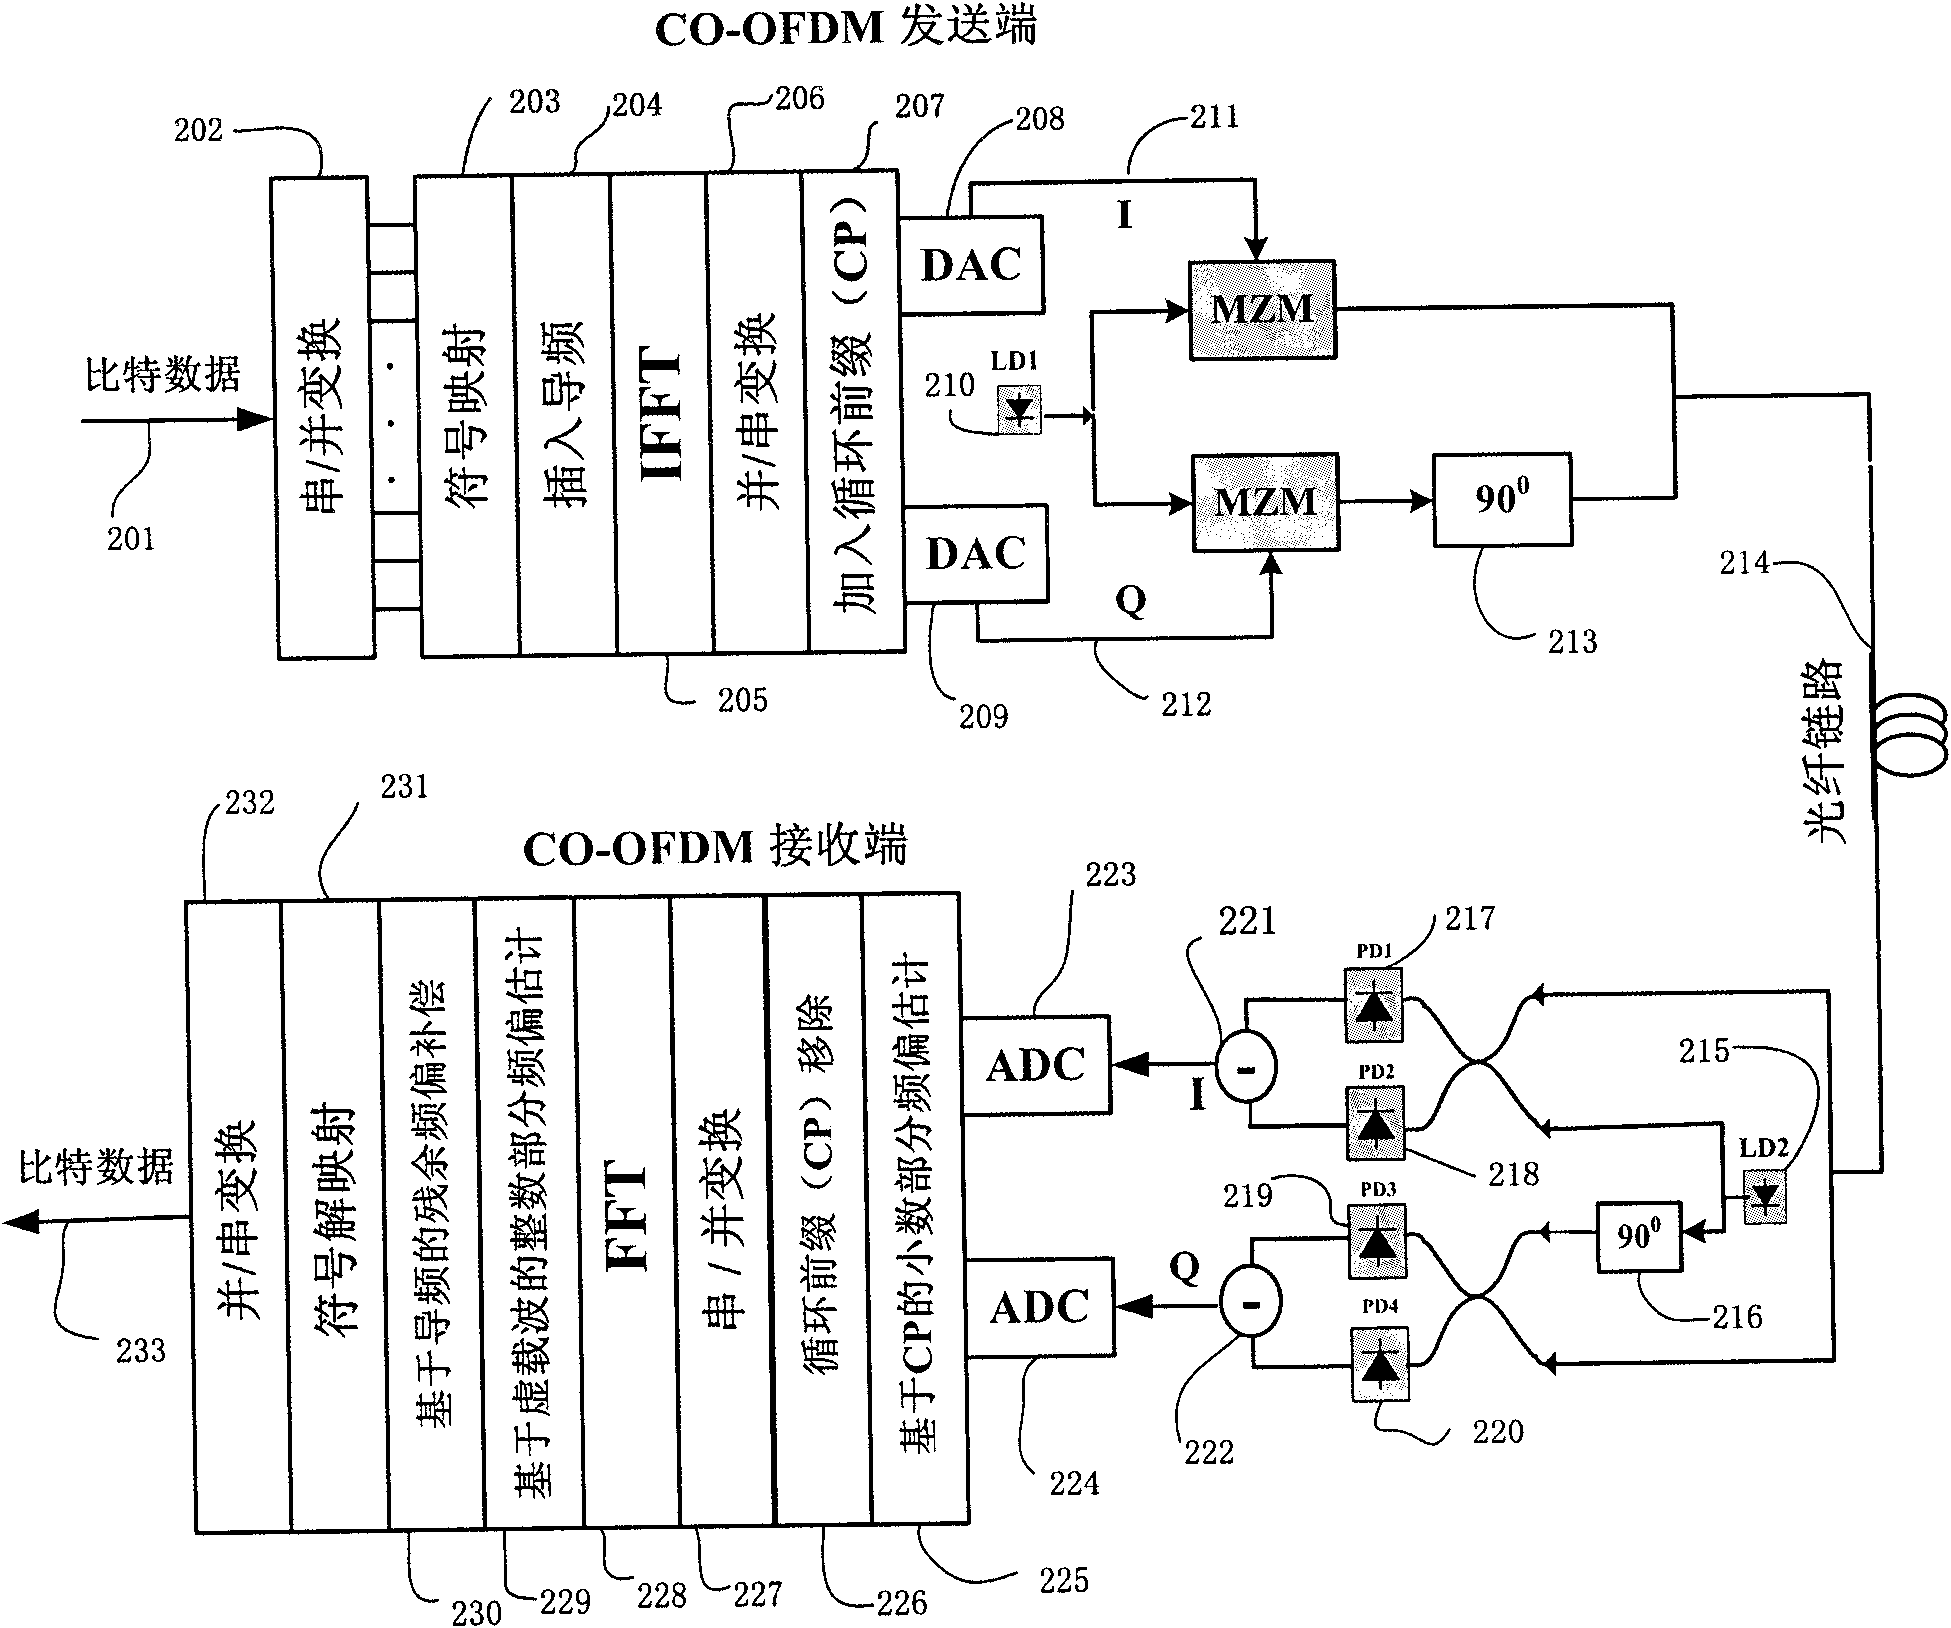 Cyclic prefix (CP) and virtual carrier based blind frequency offset estimation method in OFDM (Orthogonal Frequency Division Multiplexing) system